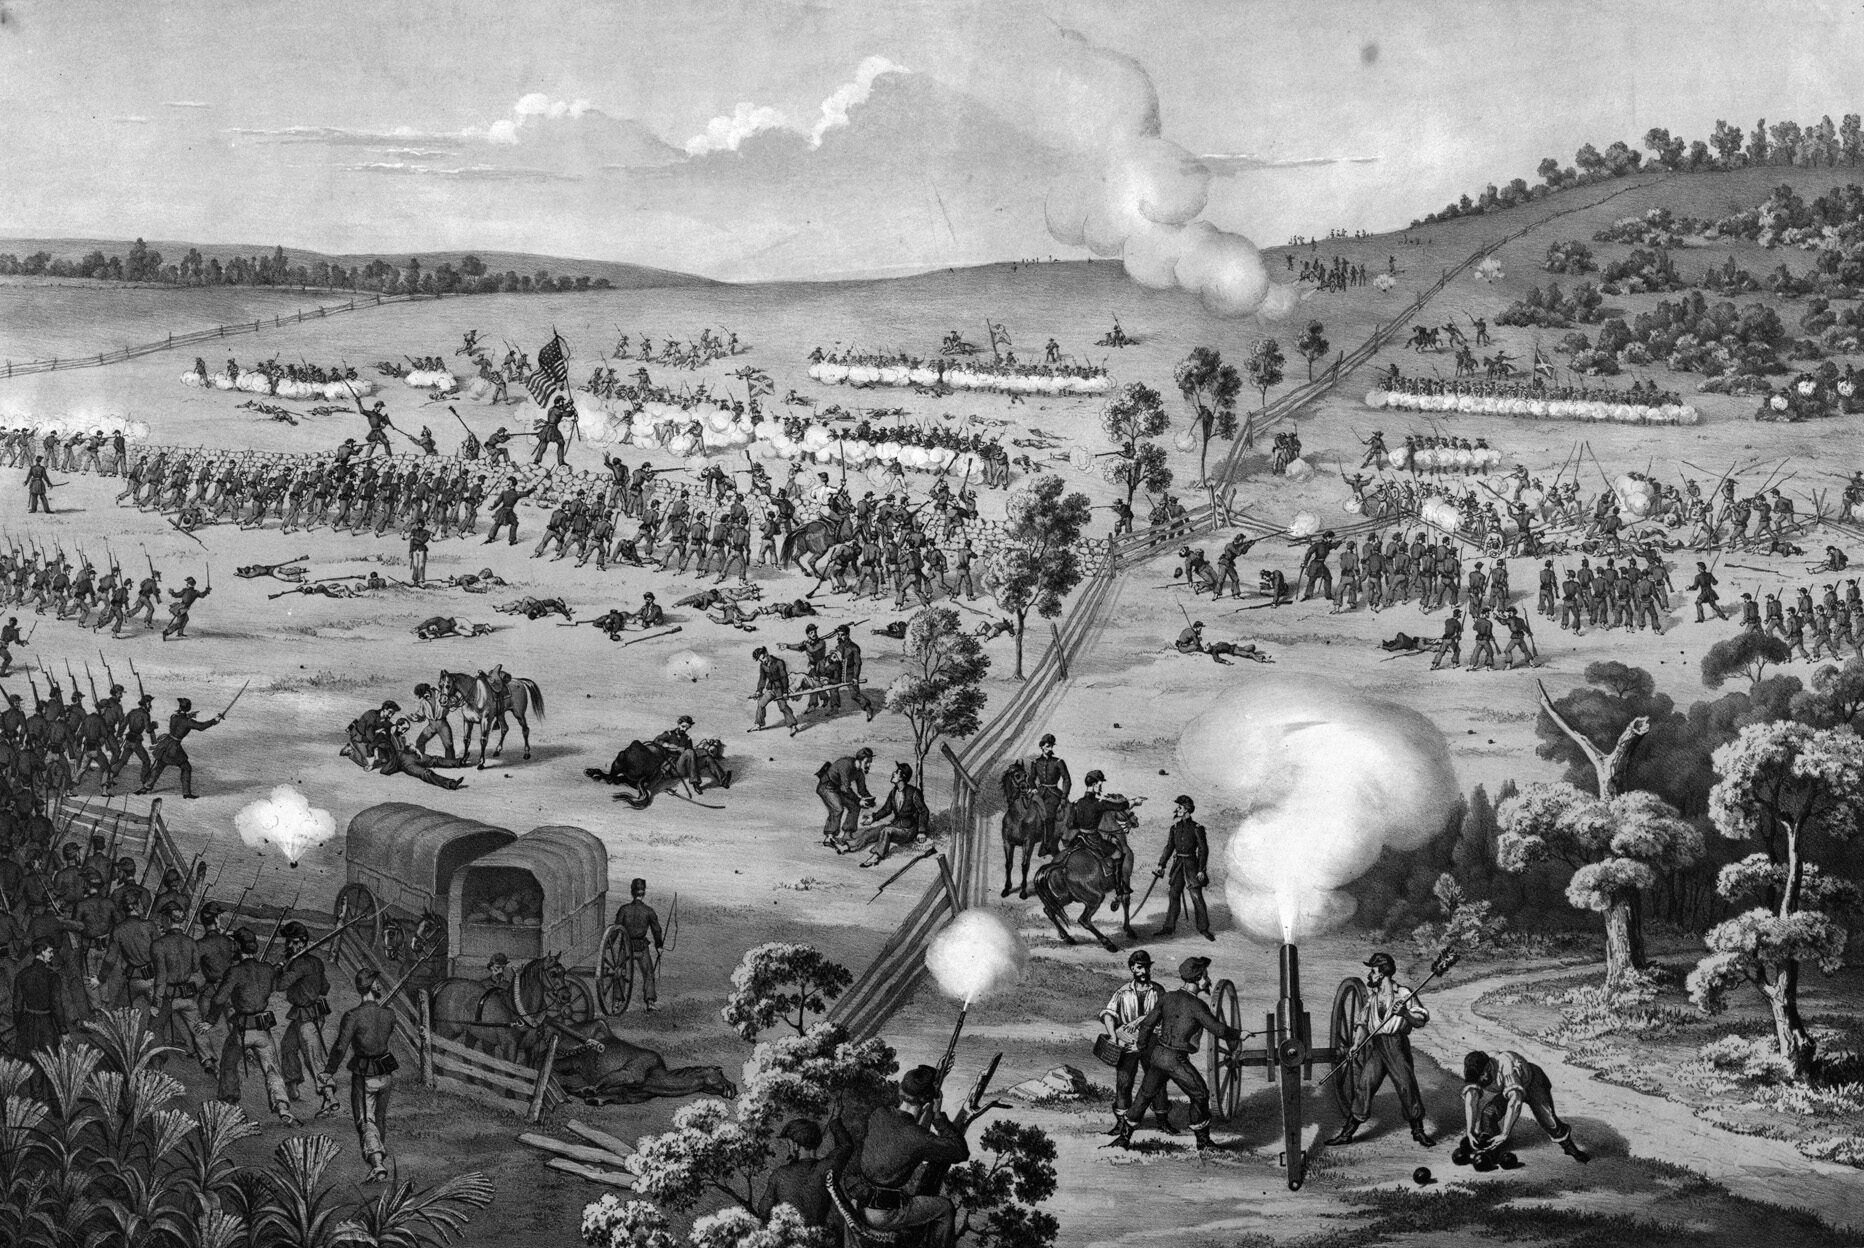 The Union IX Corps attacks the Confederate position at Fox’s Gap on September 14, 1862. The neatly arrayed battle lines depicted in the illustration bear little resemblance to the actual fight in heavily wooded, steep terrain. 